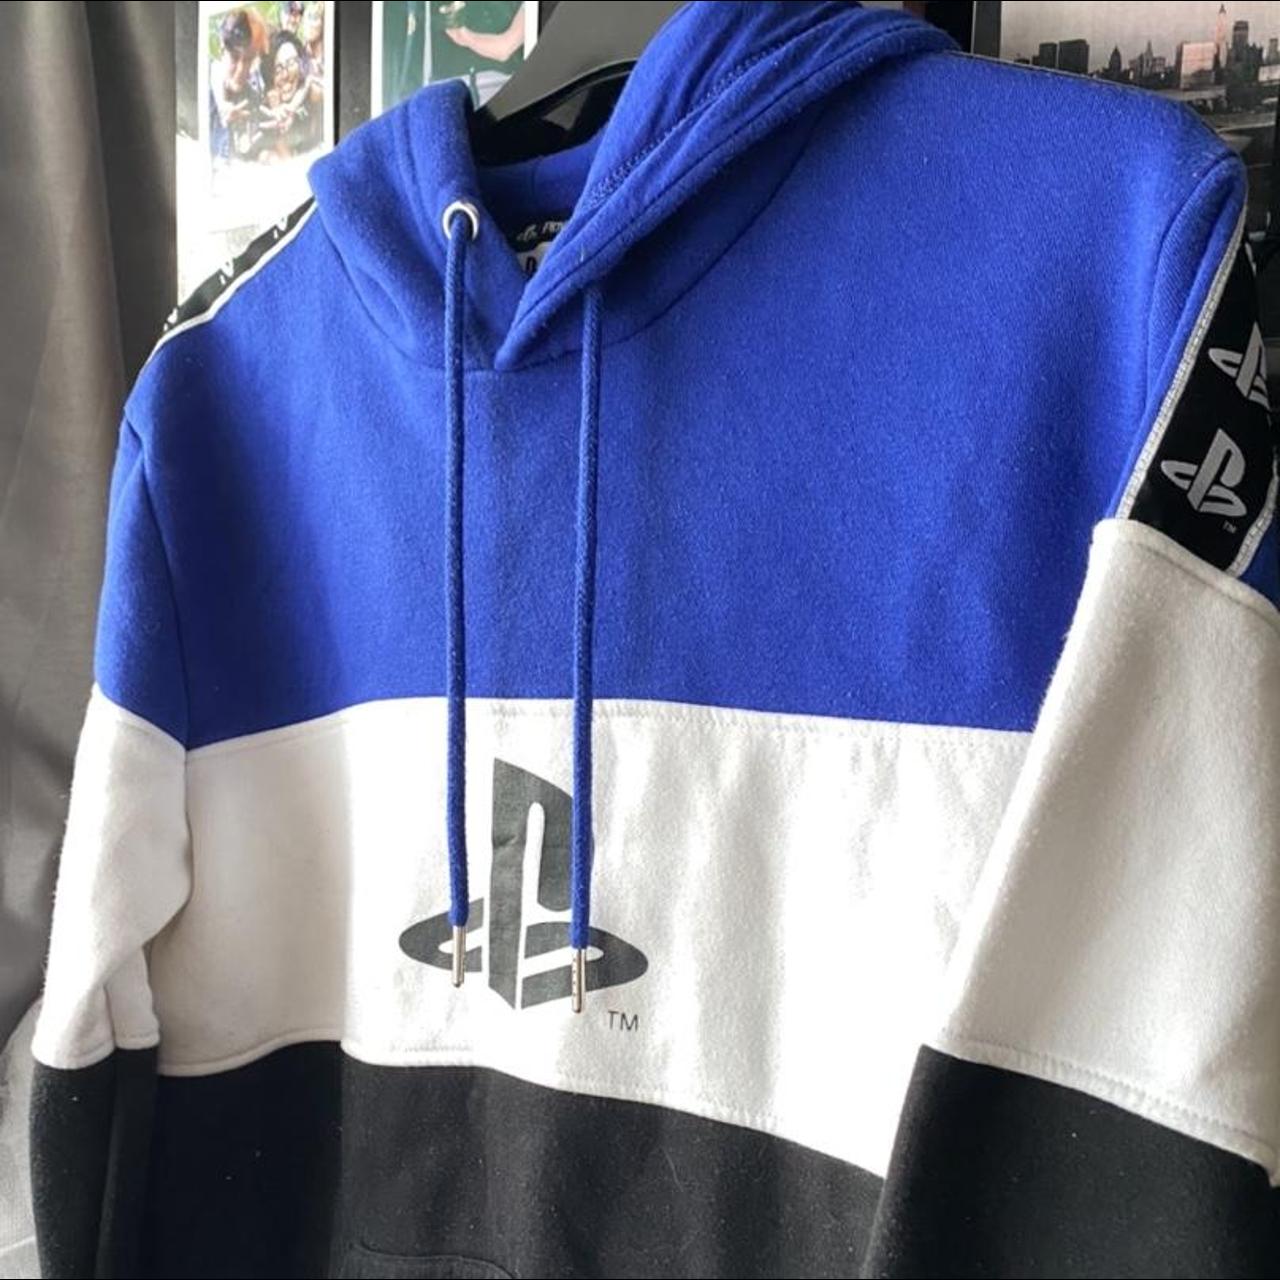 blue, white and black hoodie with playstation logo.